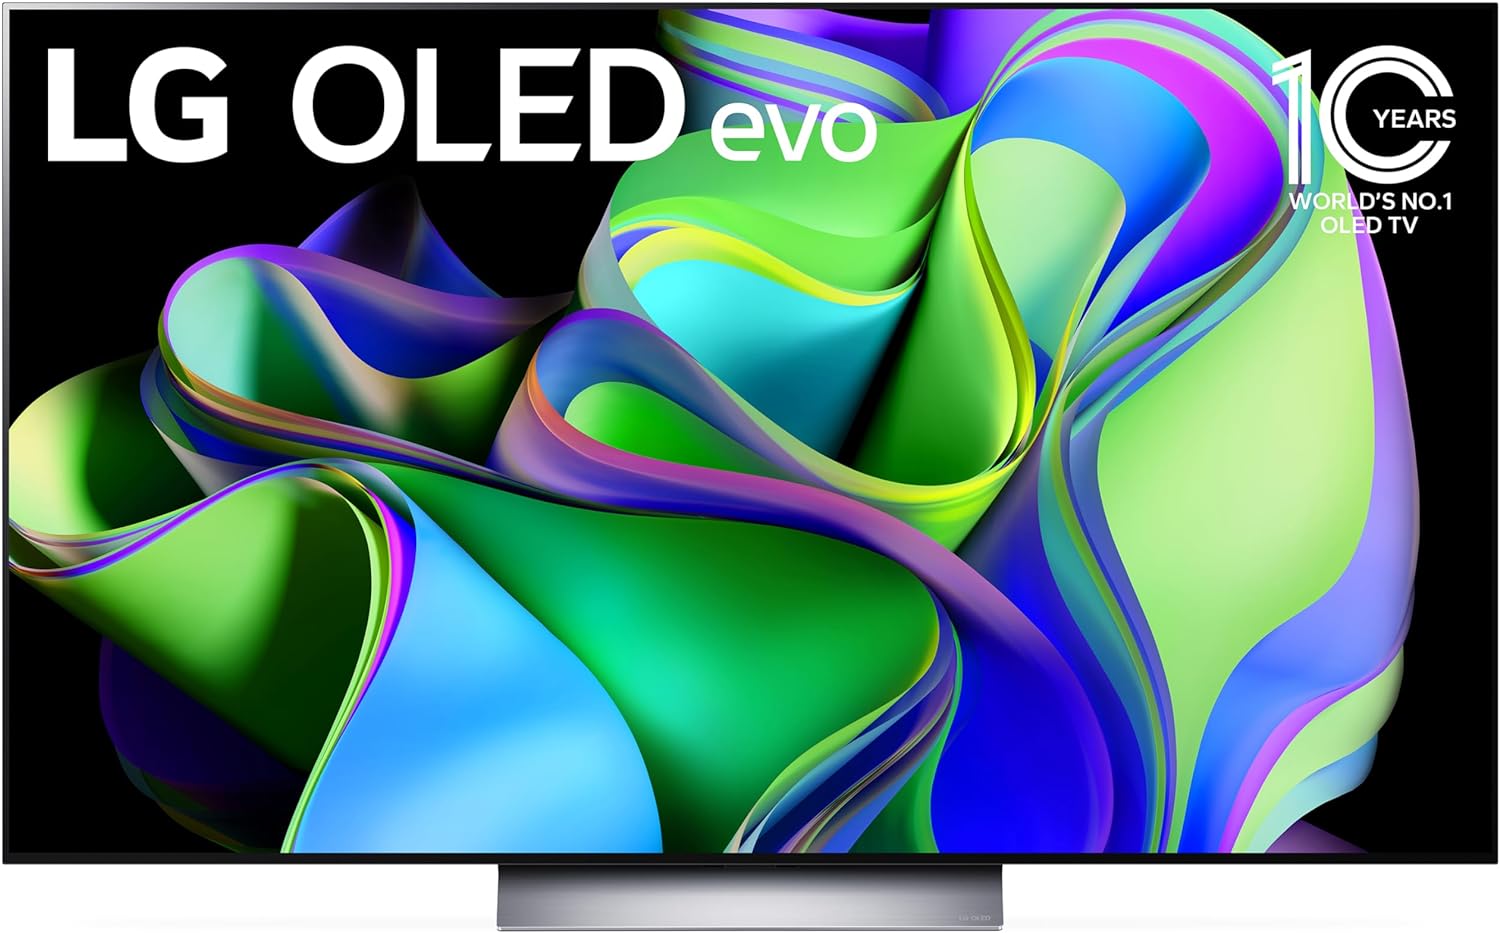 LED TV Trends